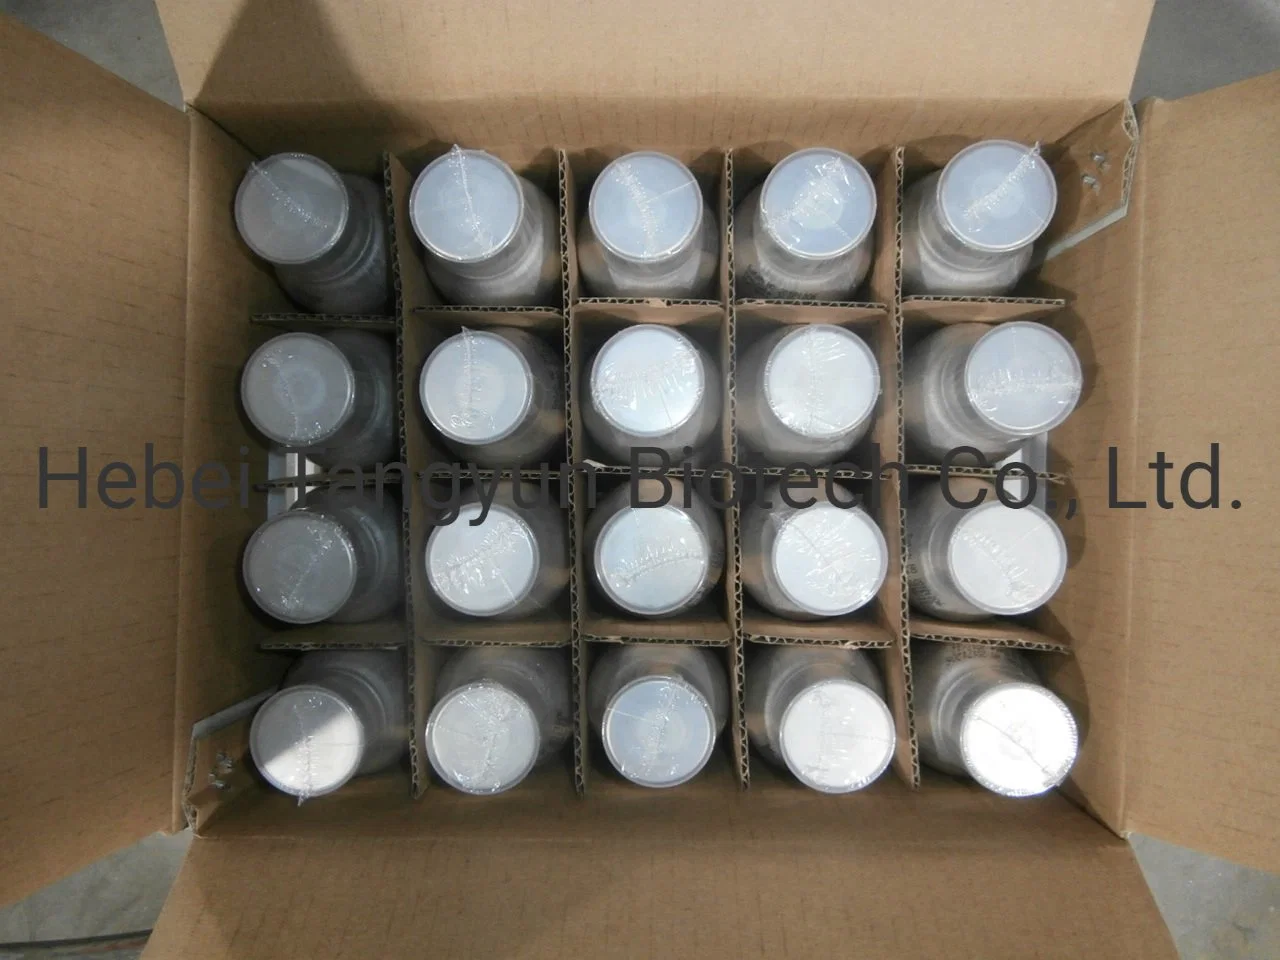 Tebufenozide 24%+Emamectin Benzoate 2%Sc Insecticide Mixture Wholesale/Supplierr